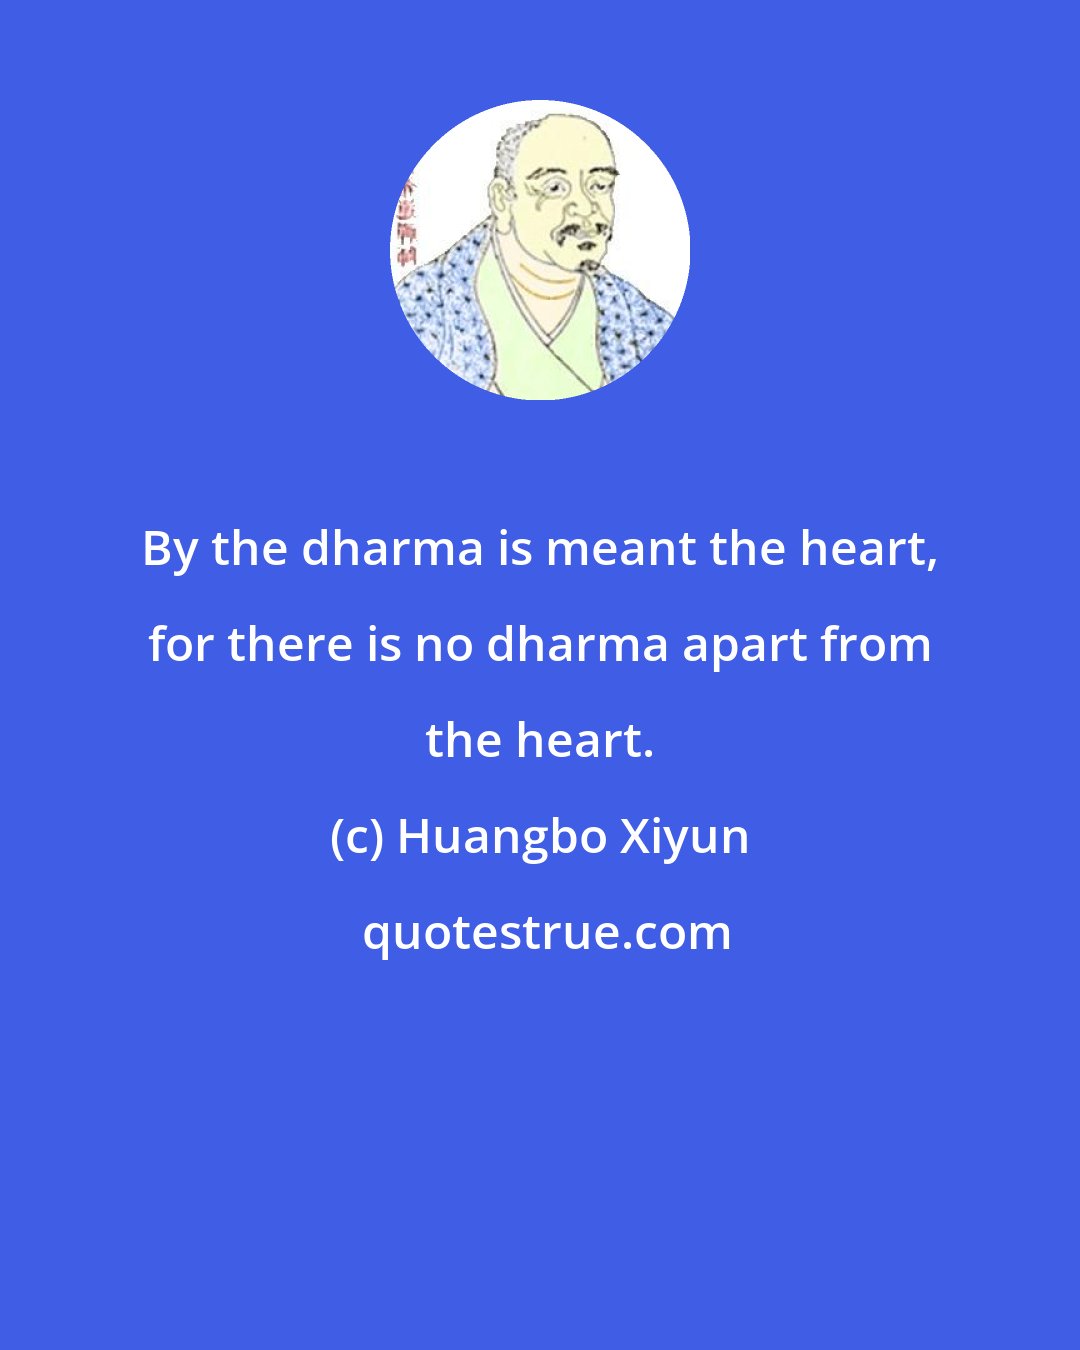 Huangbo Xiyun: By the dharma is meant the heart, for there is no dharma apart from the heart.